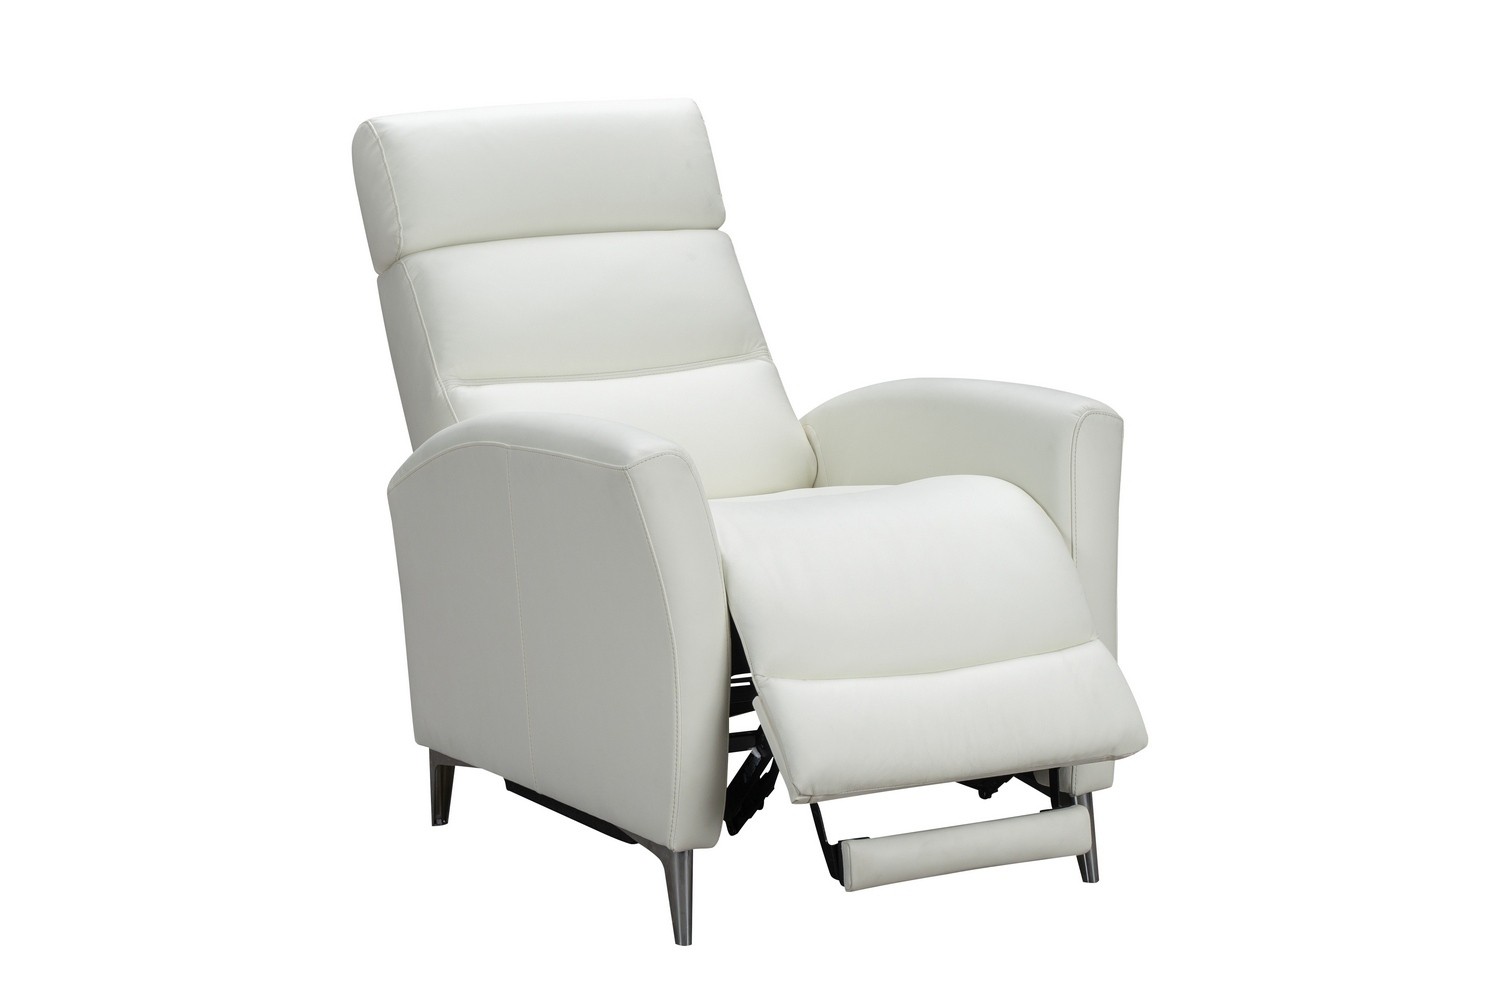 Barcalounger Zane Recliner Chair - Enzo Winter White/Leather Match